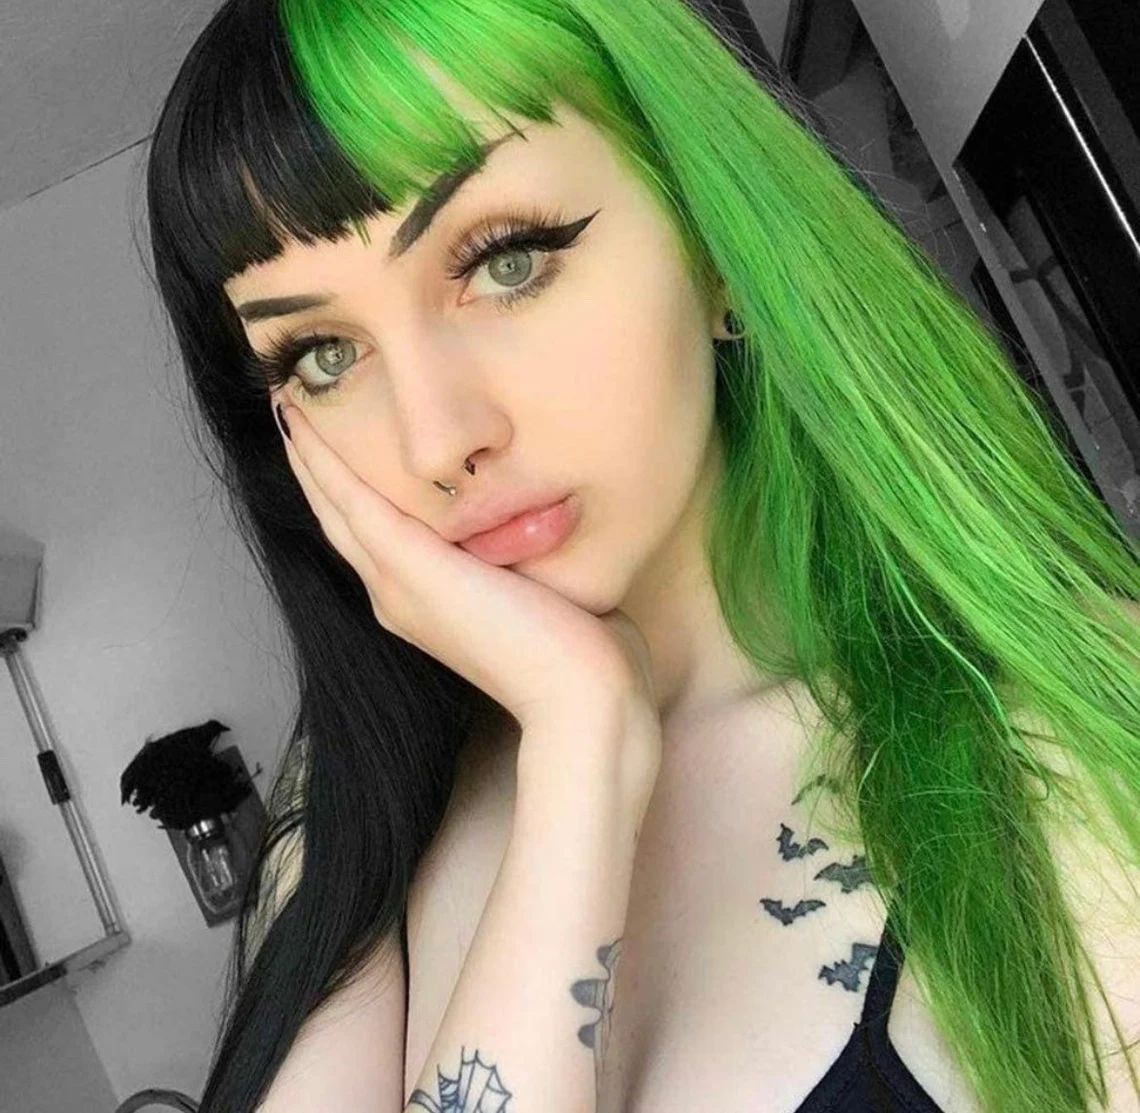 Black and Green Split Hair Wig with Bangs